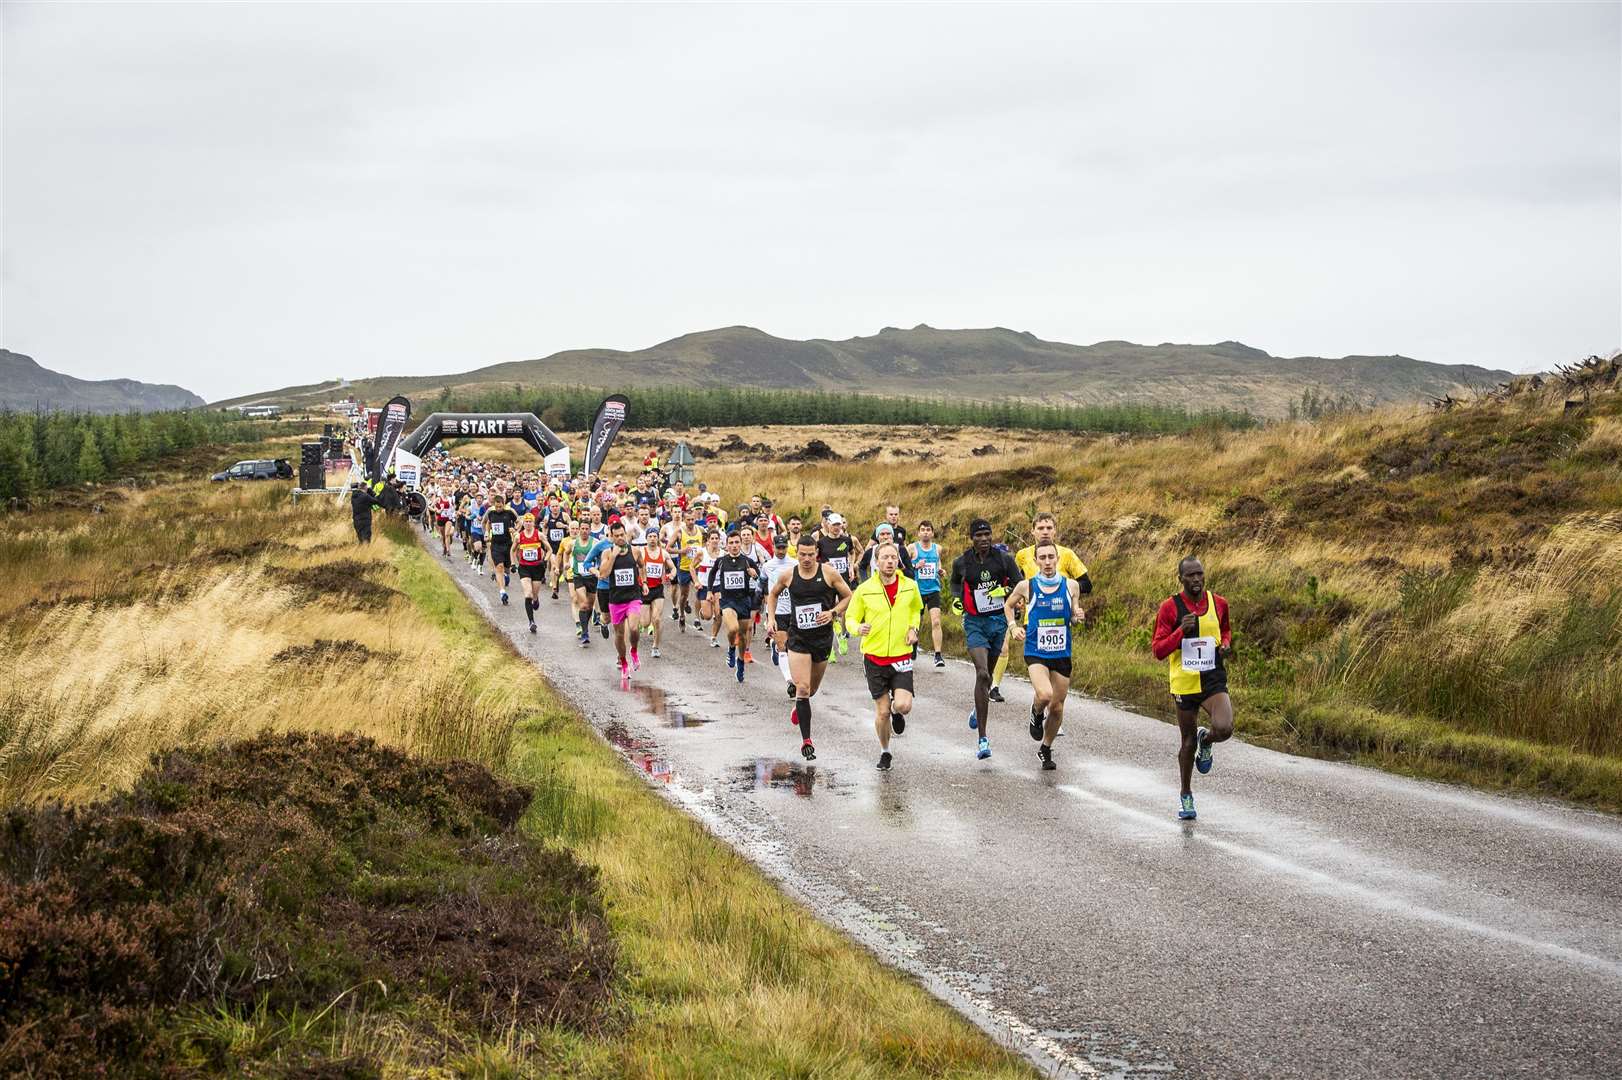 Runners make their way along the road to Whitebridge from the start of the Loch Ness Marathon.